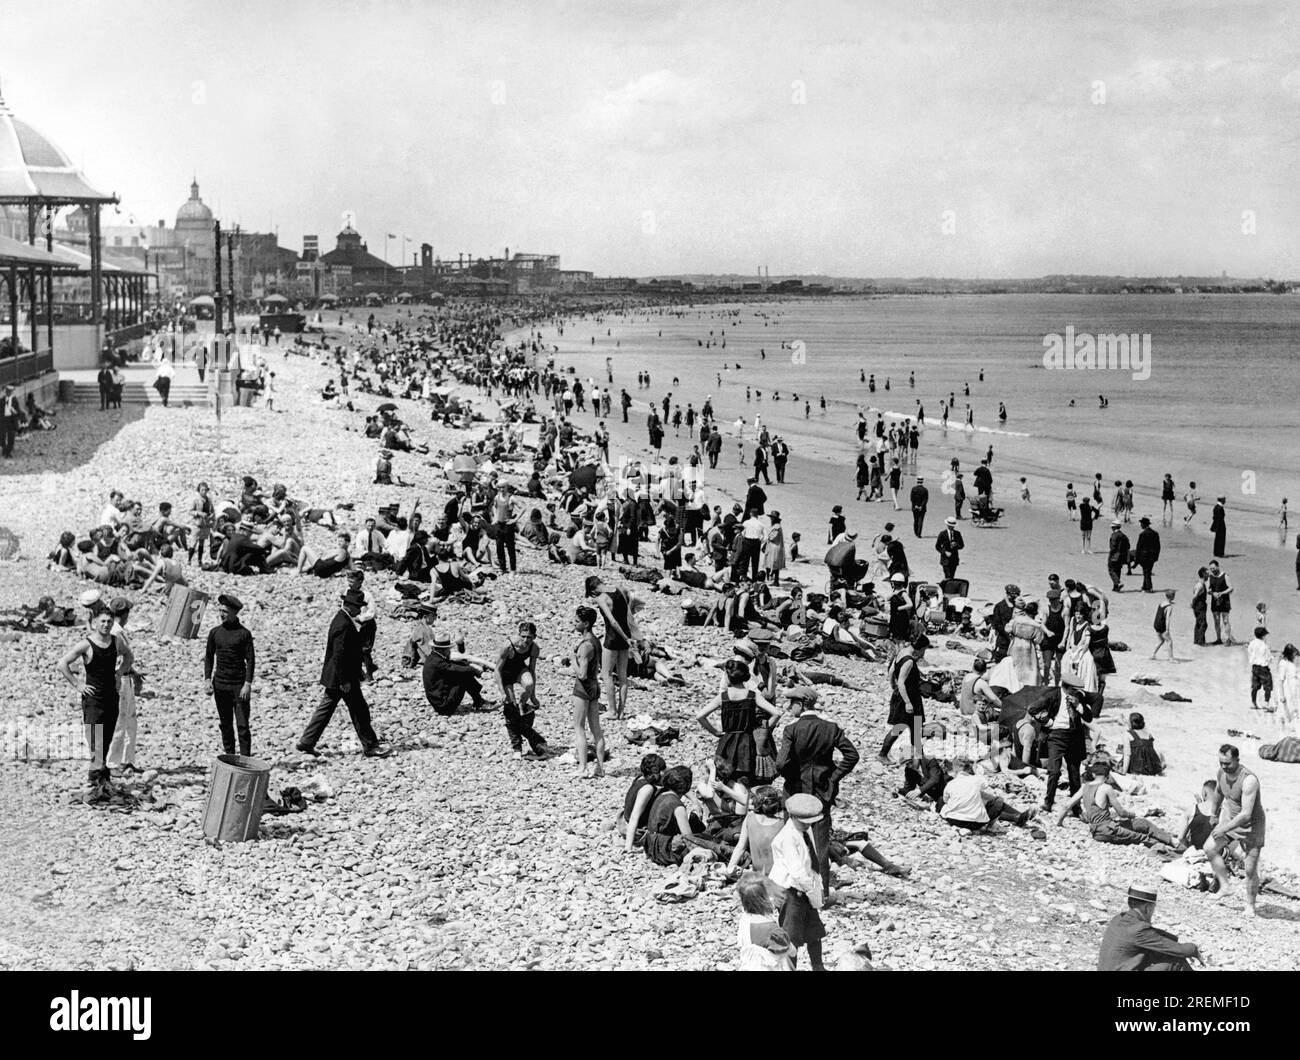 Revere, Massachusetts:  c. 1920 Thousands of Bostonites thronged to nearby Revere Beach to escape the heat wave that struck the East Coast this weekend. Stock Photo